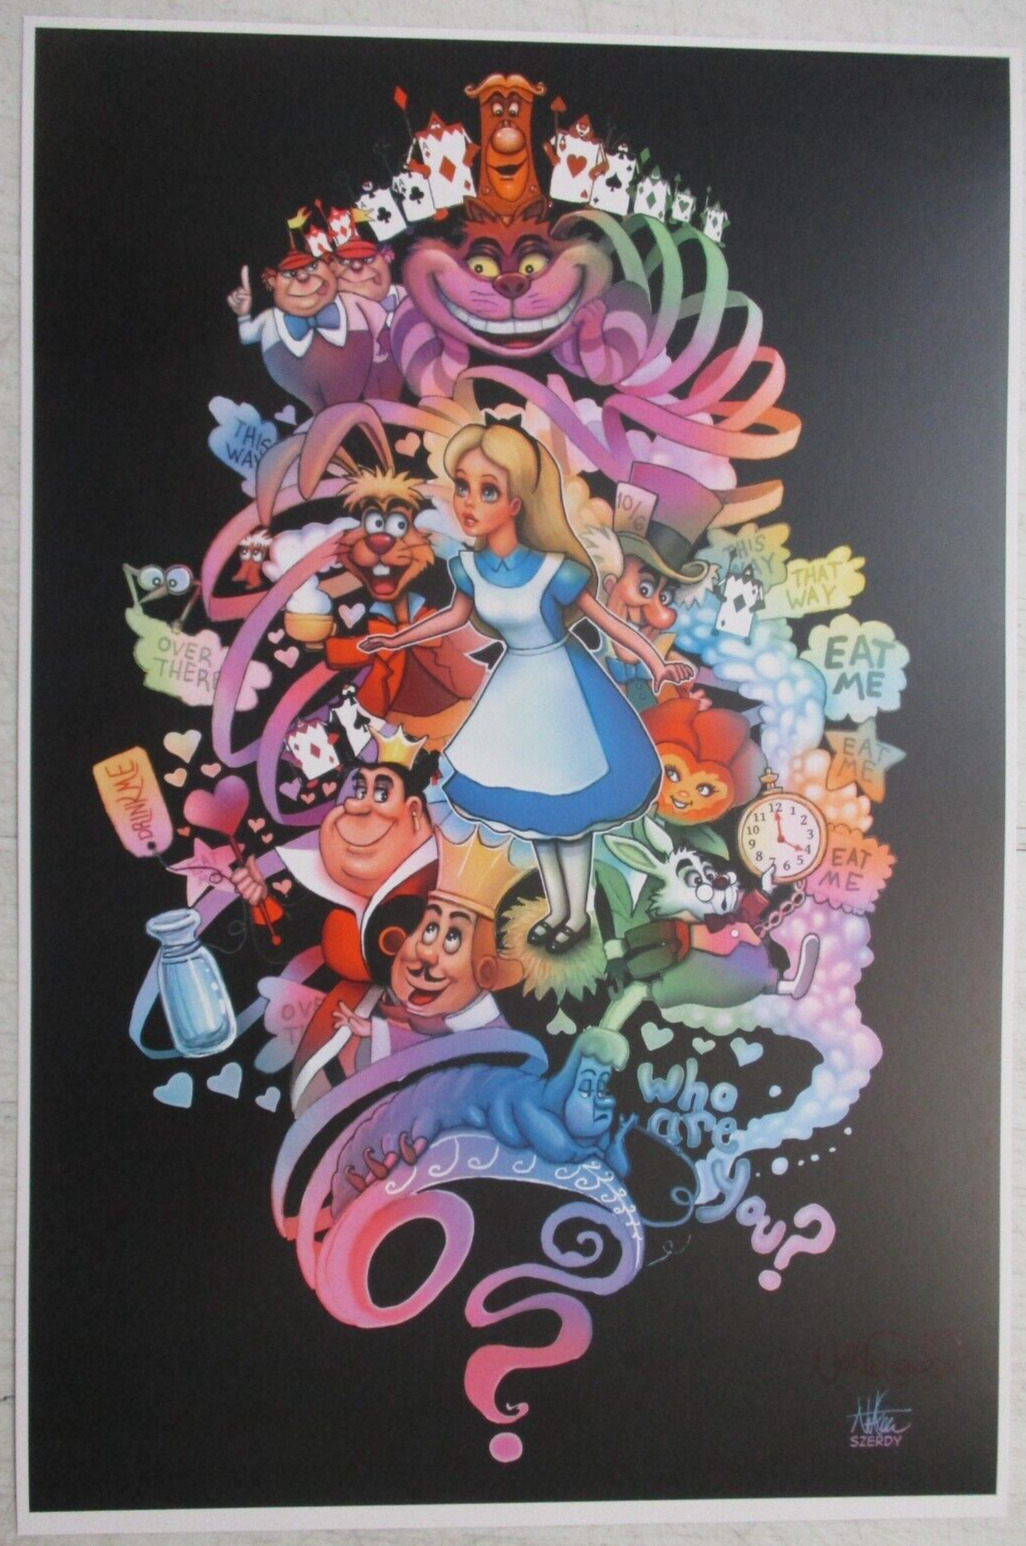 NATHAN SZERDY HAND SIGNED 12X18 ART PRINT ALICE IN WONDERLAND CAST PIN UP NEW